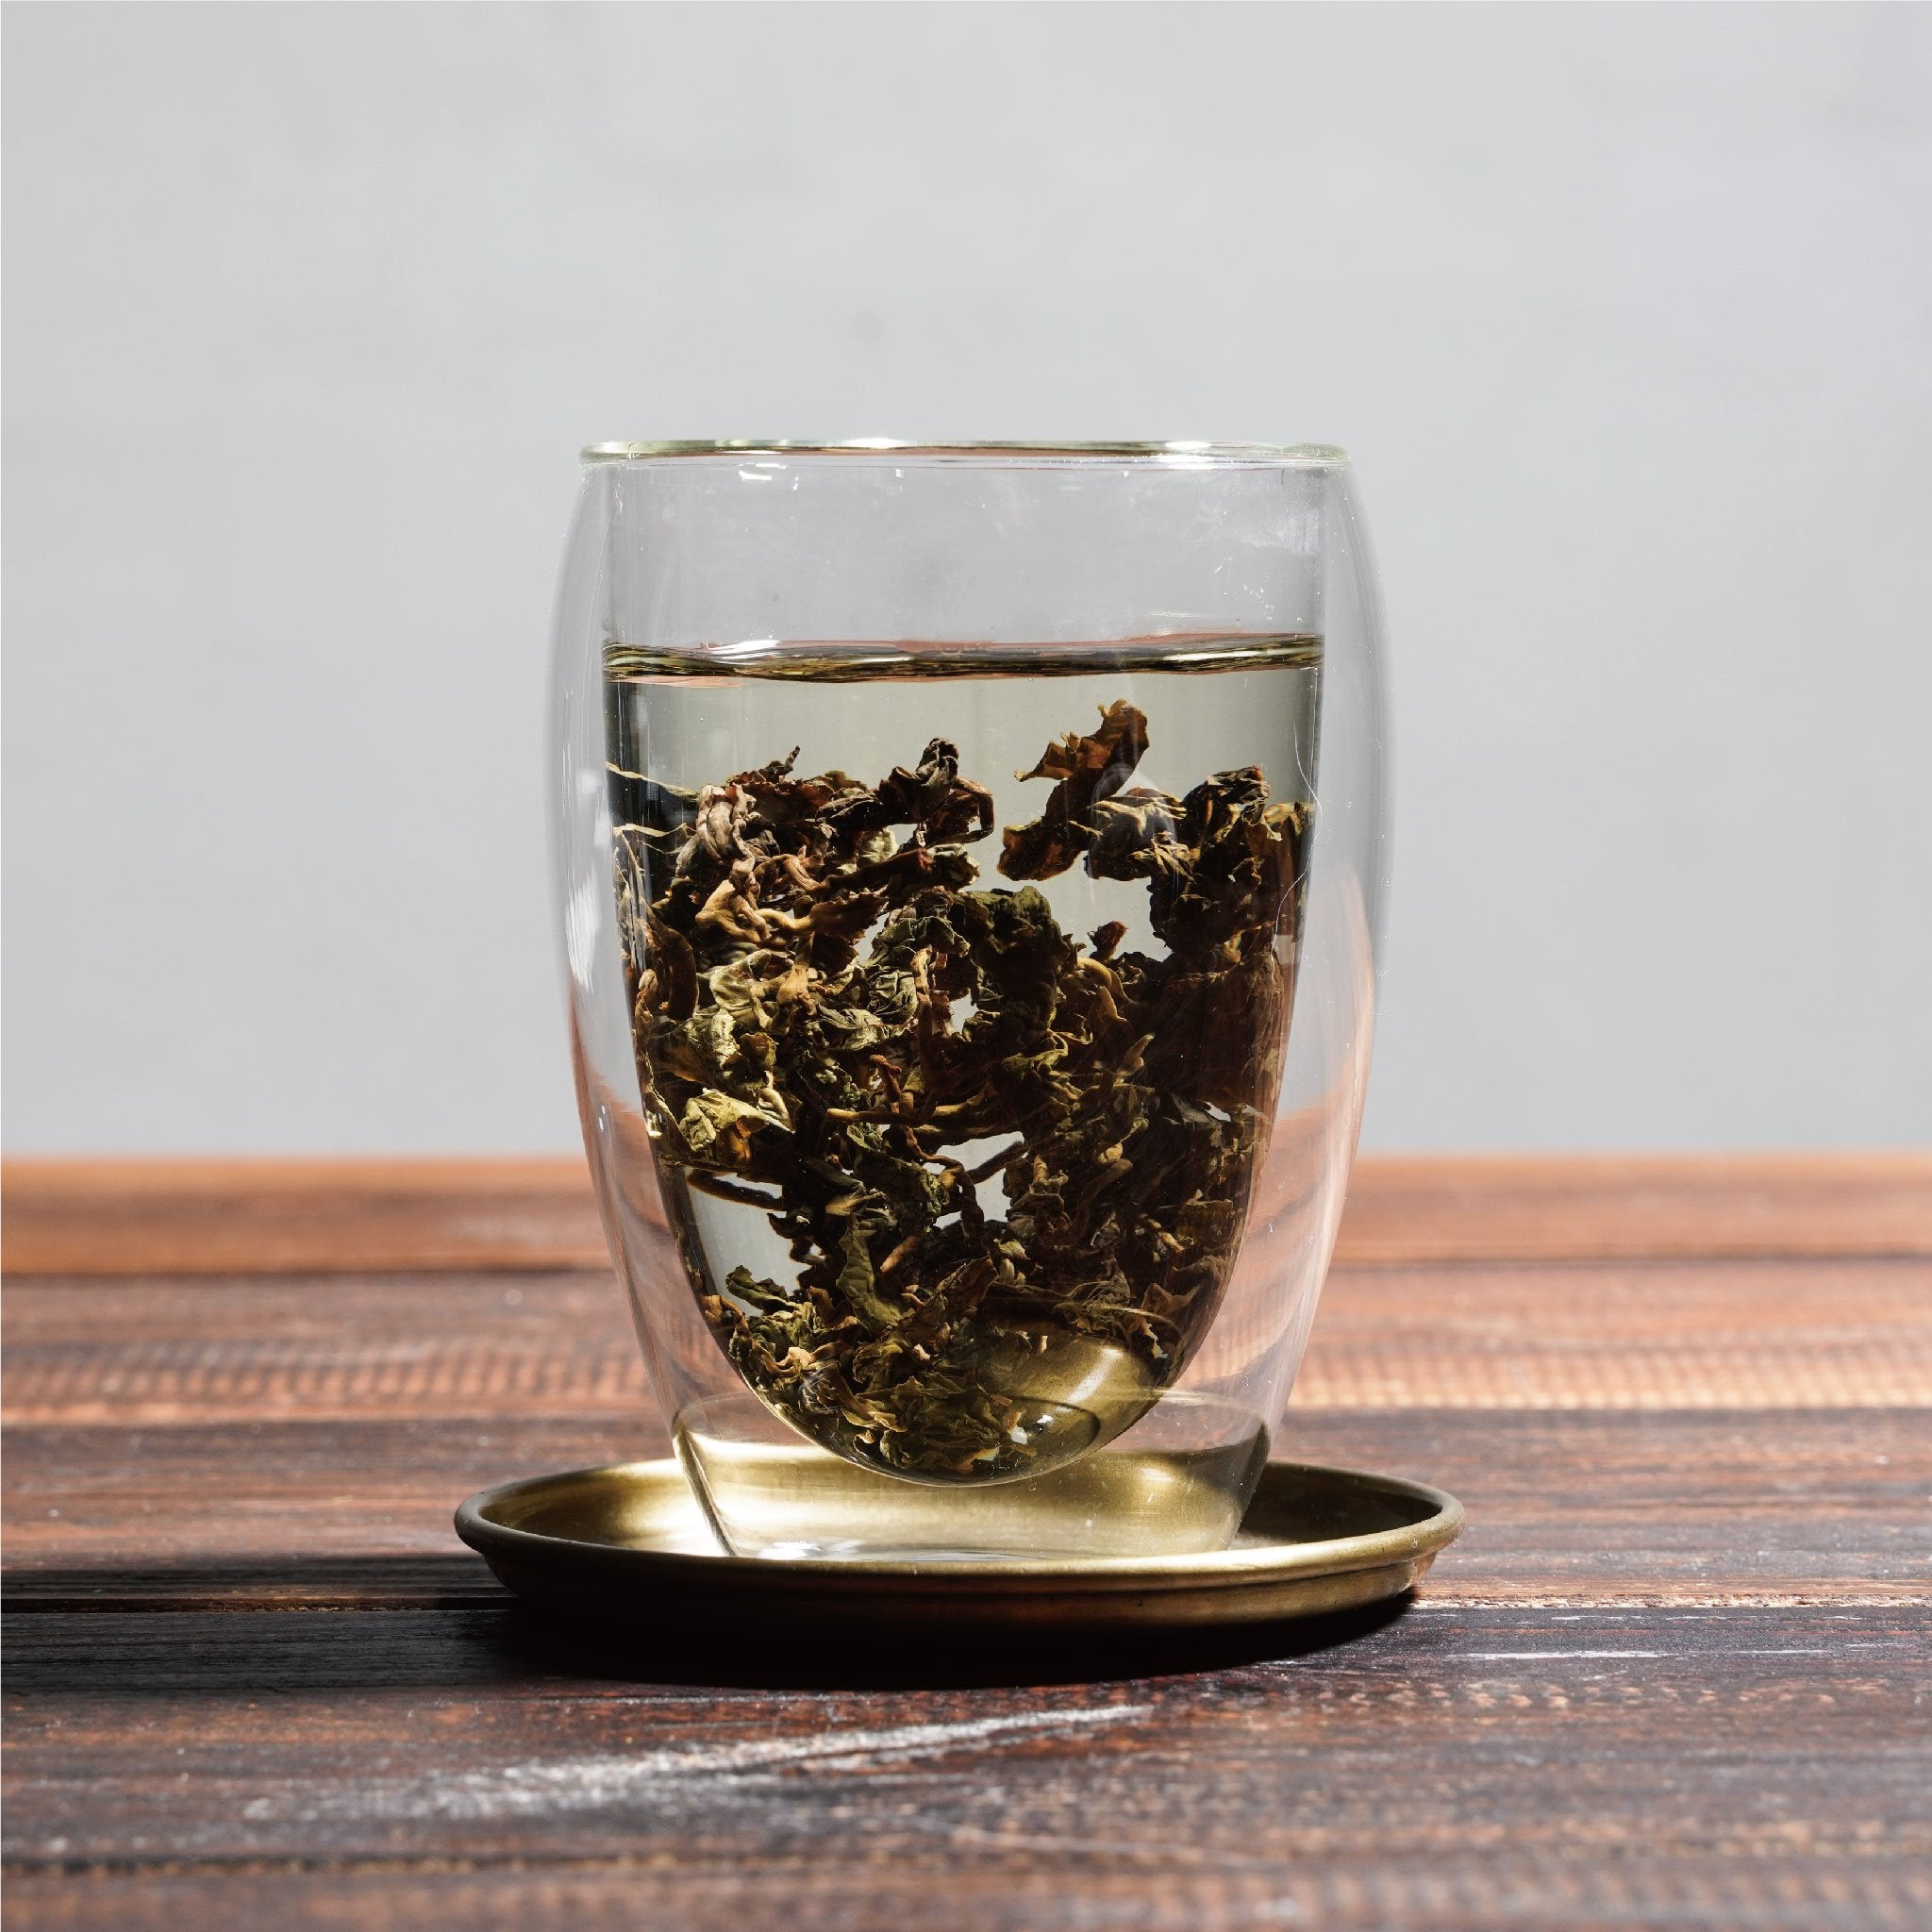 tie guan yin iron goddess of mercy wet tea leaves floating in cup